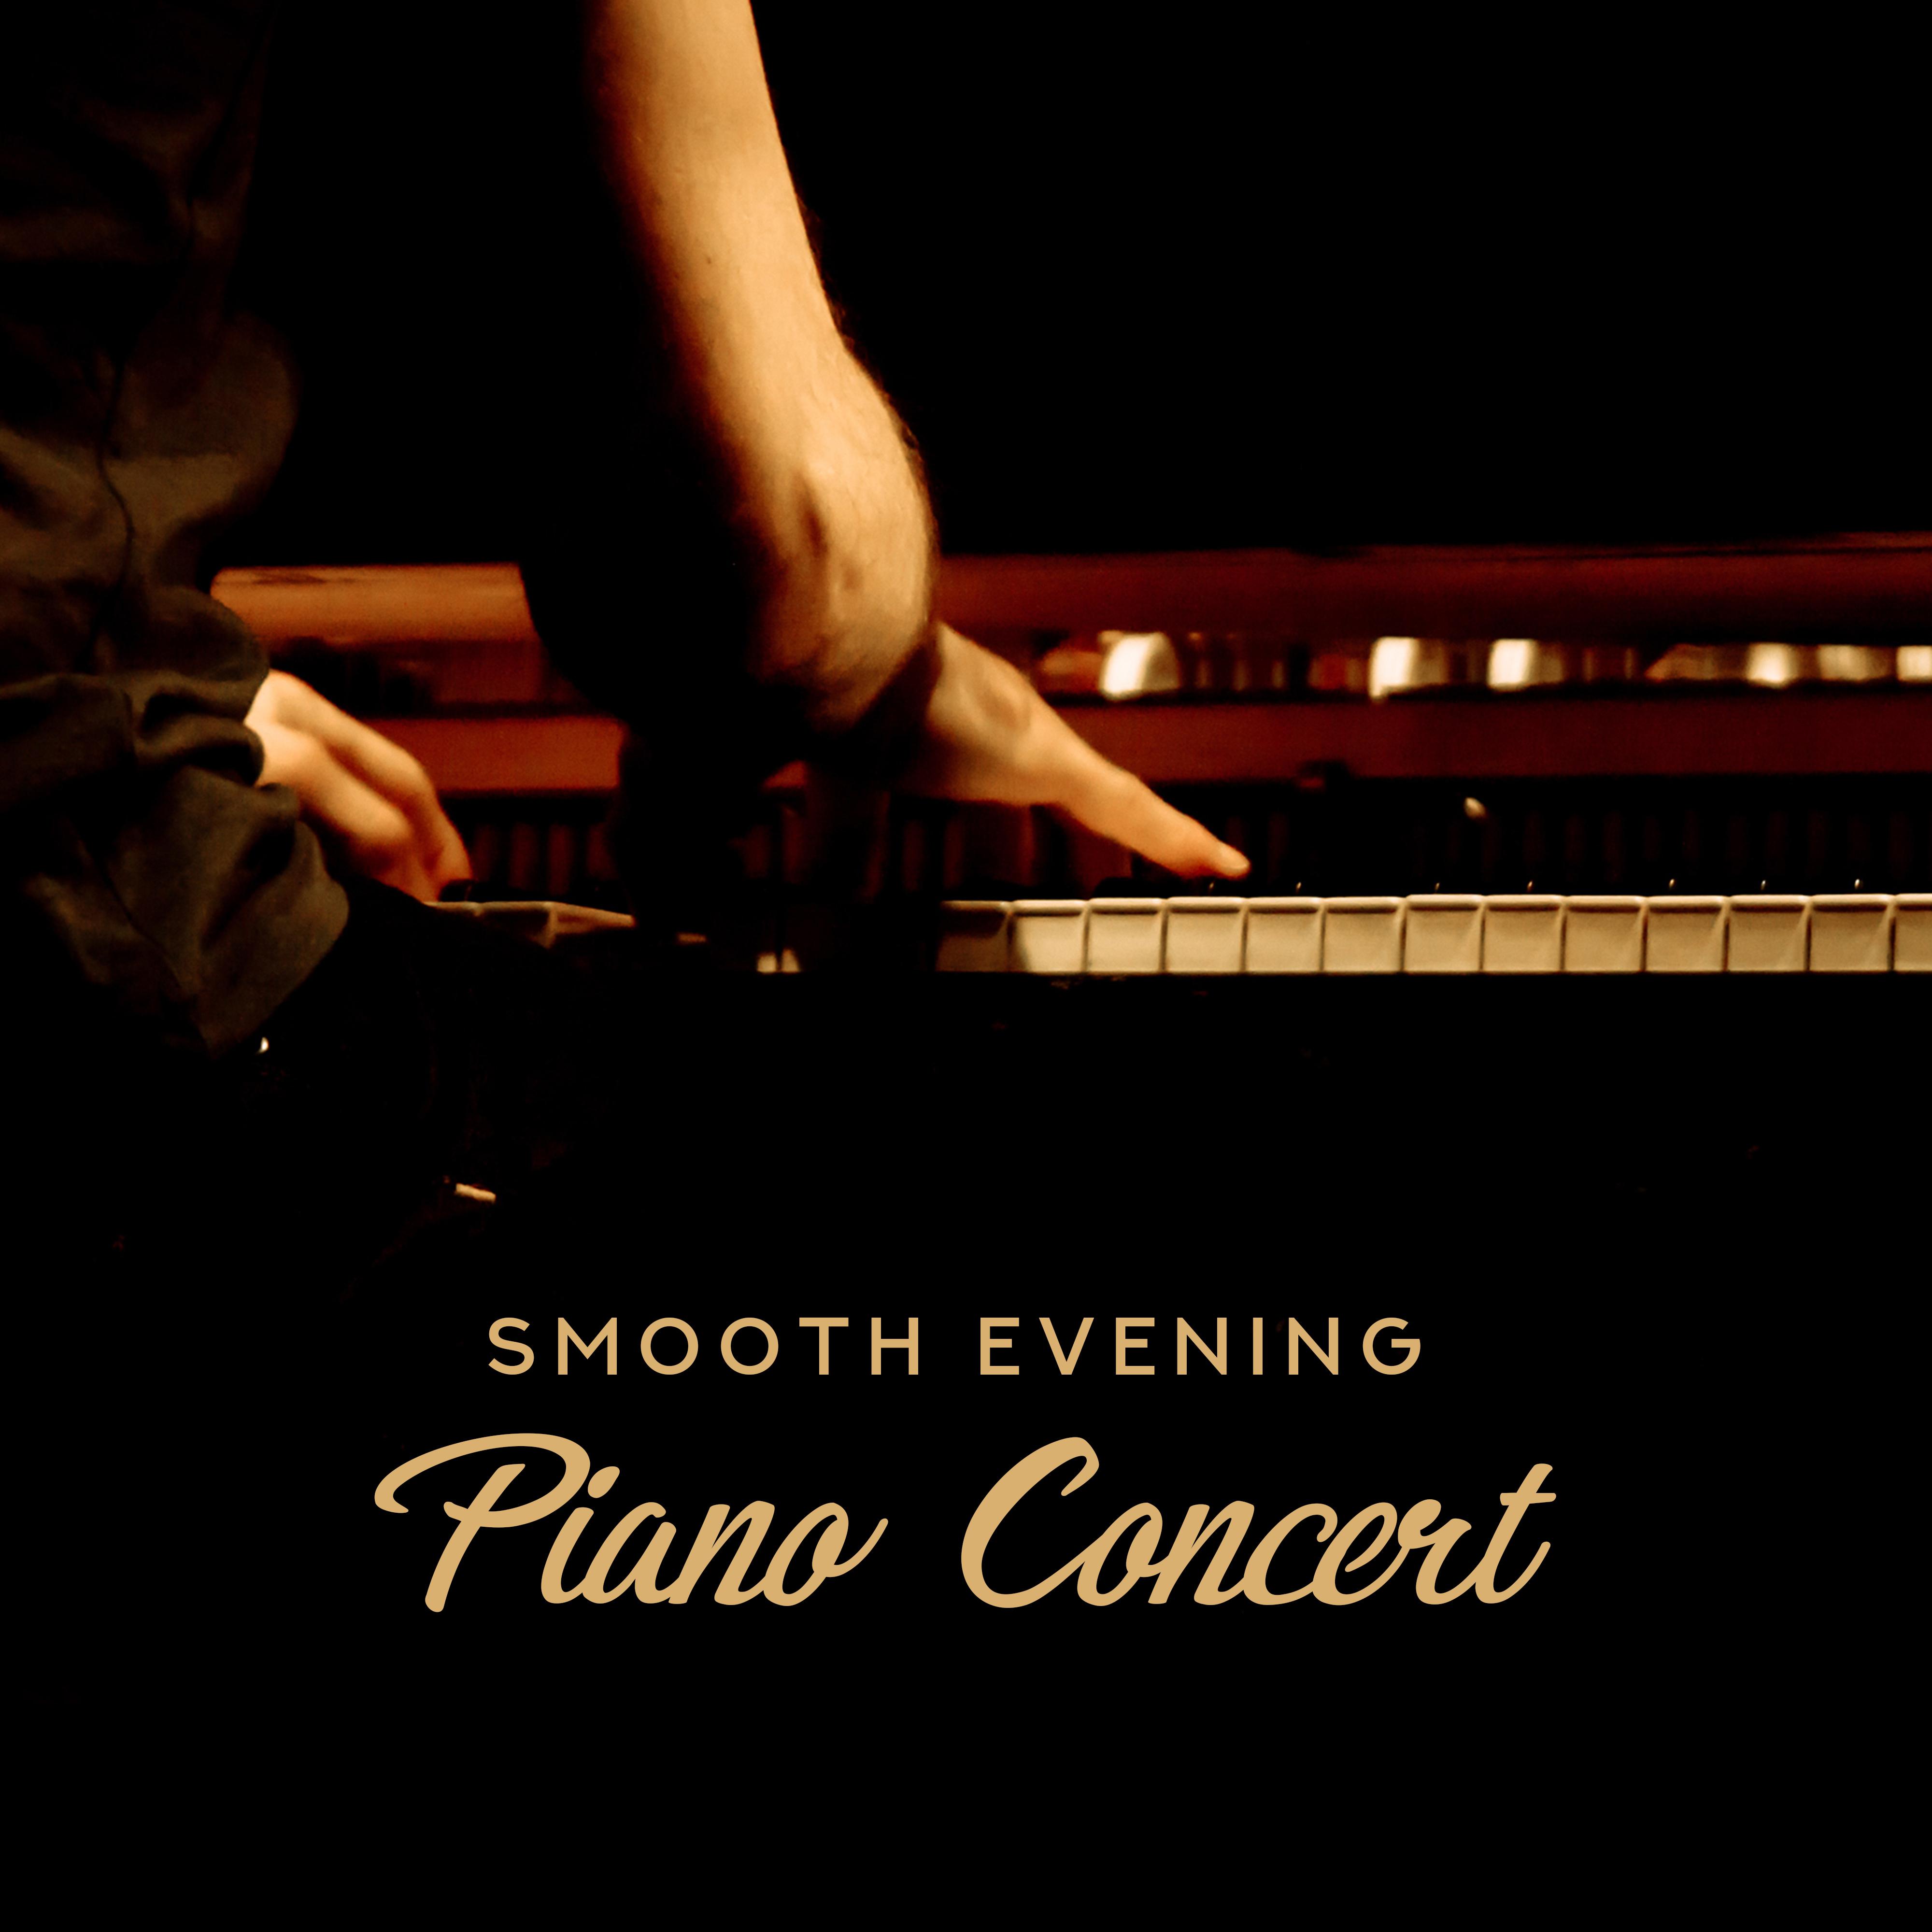 Smooth Evening Piano Concert: 2019 Instrumental Piano Soft Music for Total Calming Down, Rest & Relax, Insipirational Melodies & Delicate Sounds